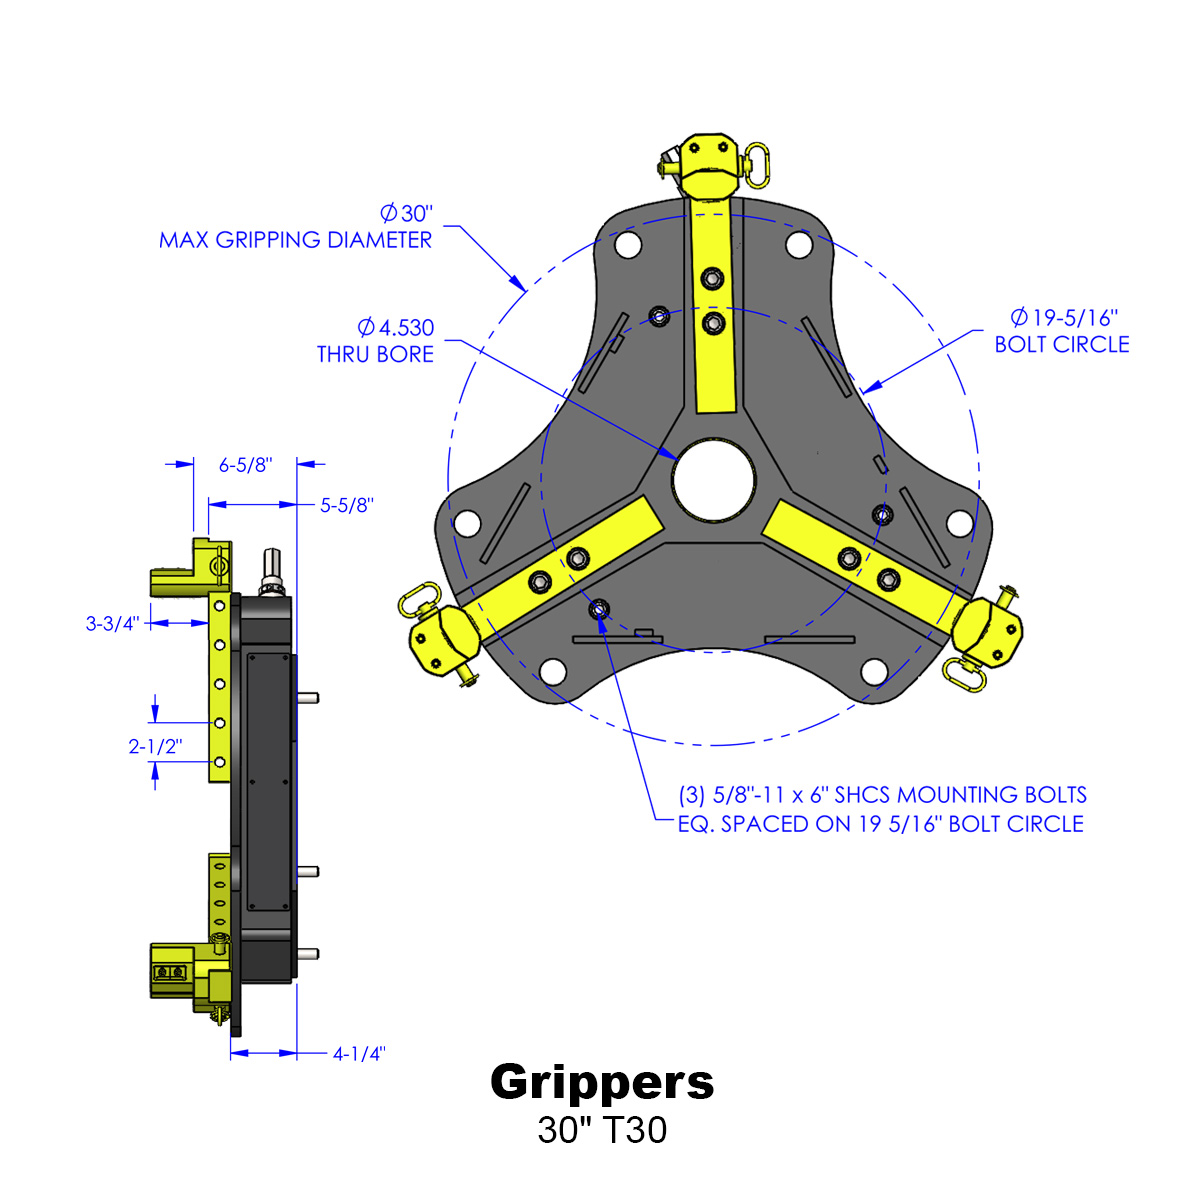 02-MAG-Grippers-1200sq